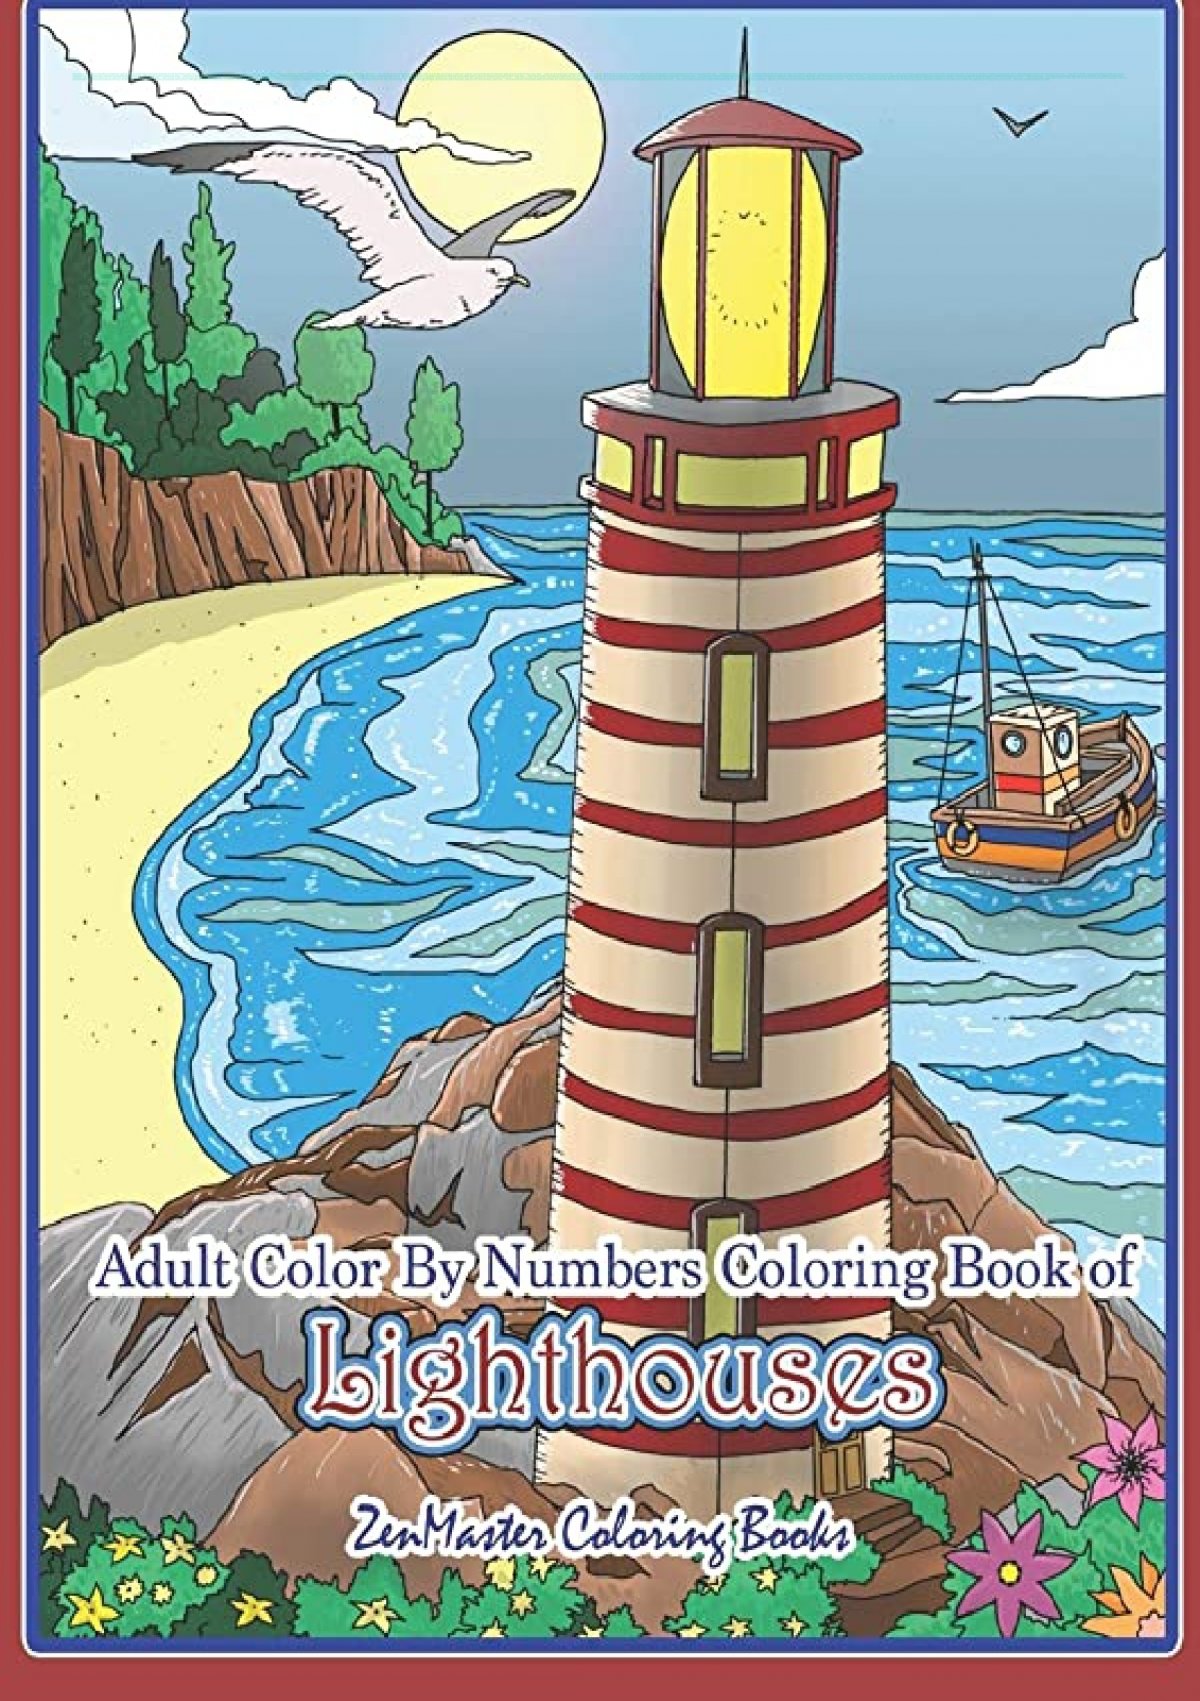 pdf-adult-color-by-numbers-coloring-book-of-lighthouses-lighthouse-color-by-number-book-for